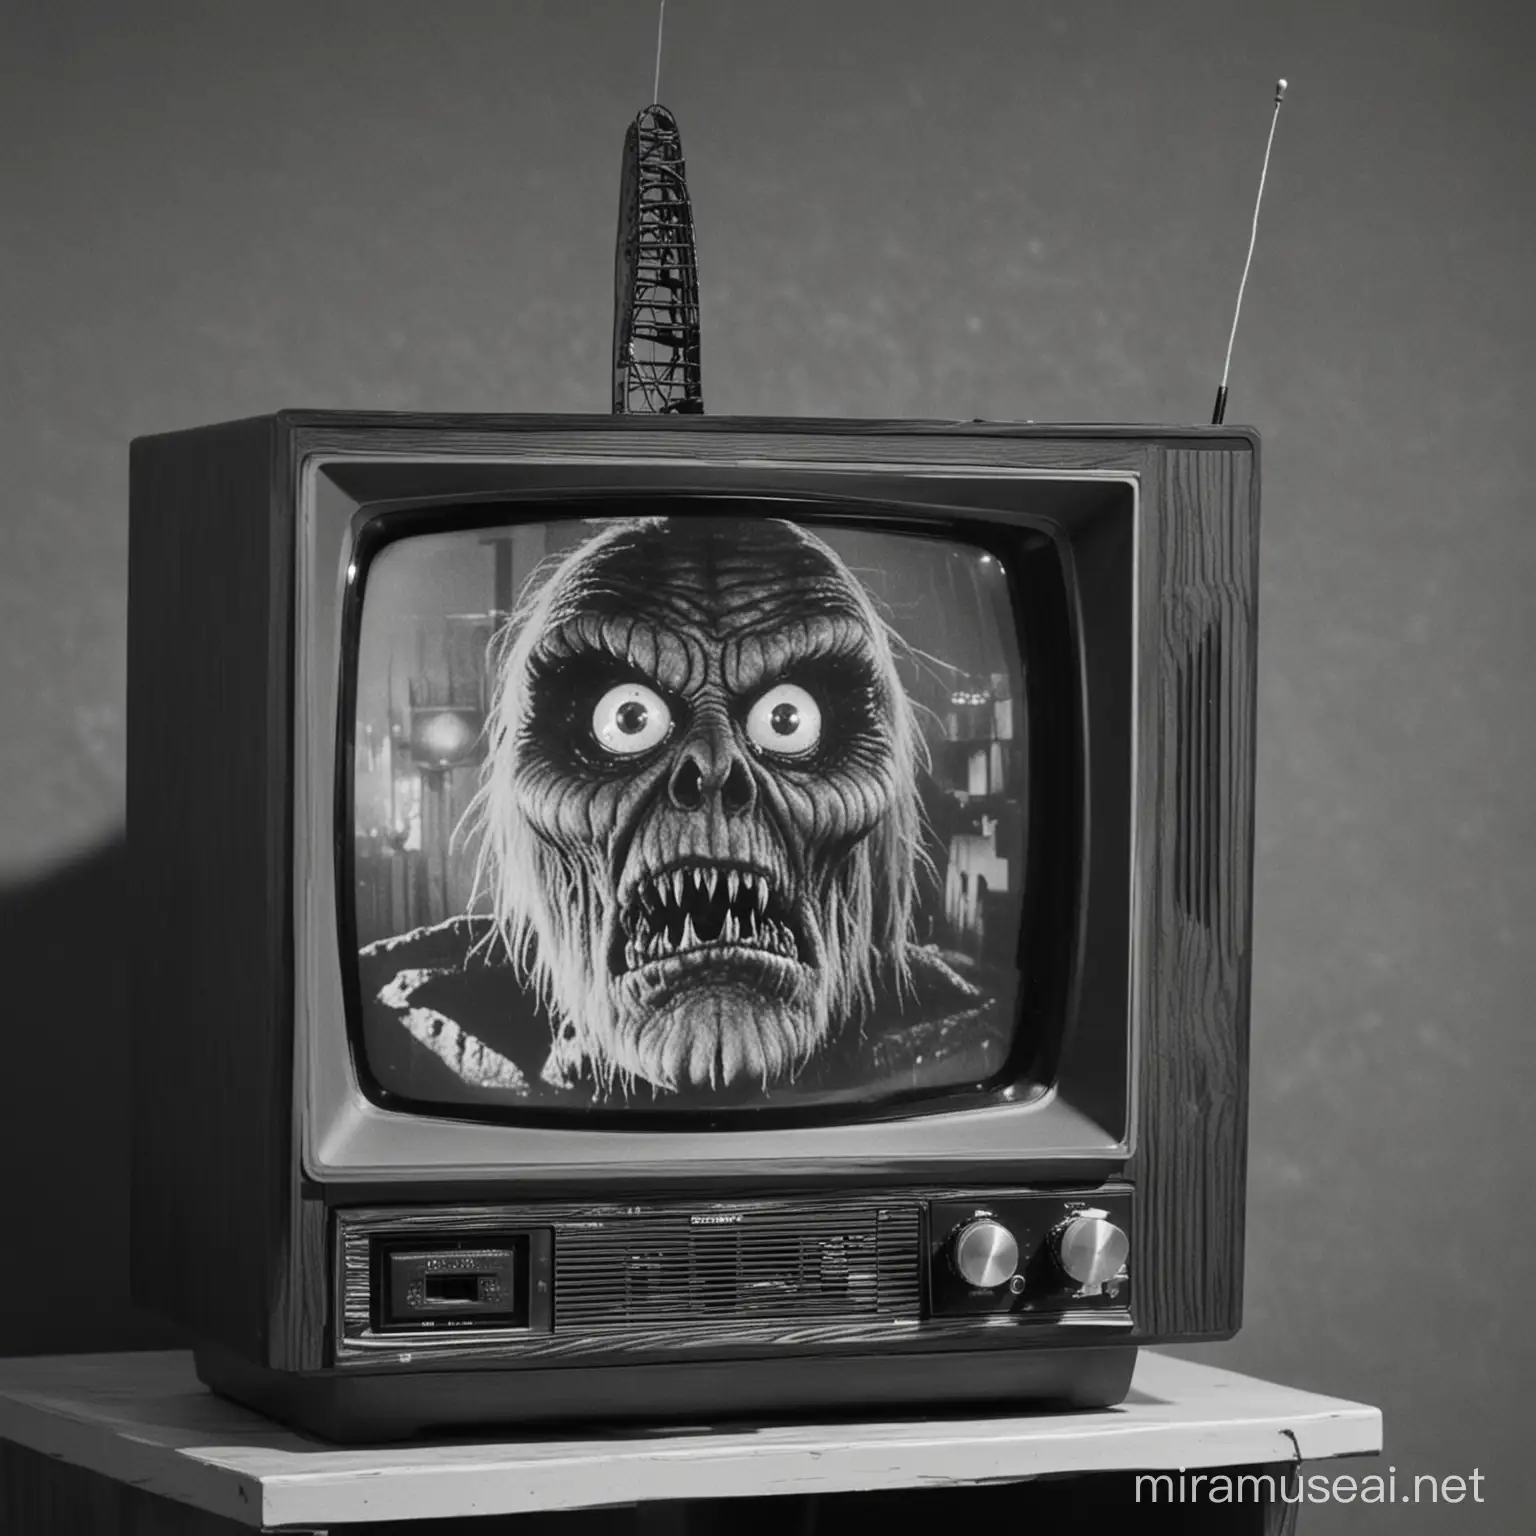 1970s television with the antenna. On the black and white screen is an image of a Saturday night fright night chiller theater monster movie.